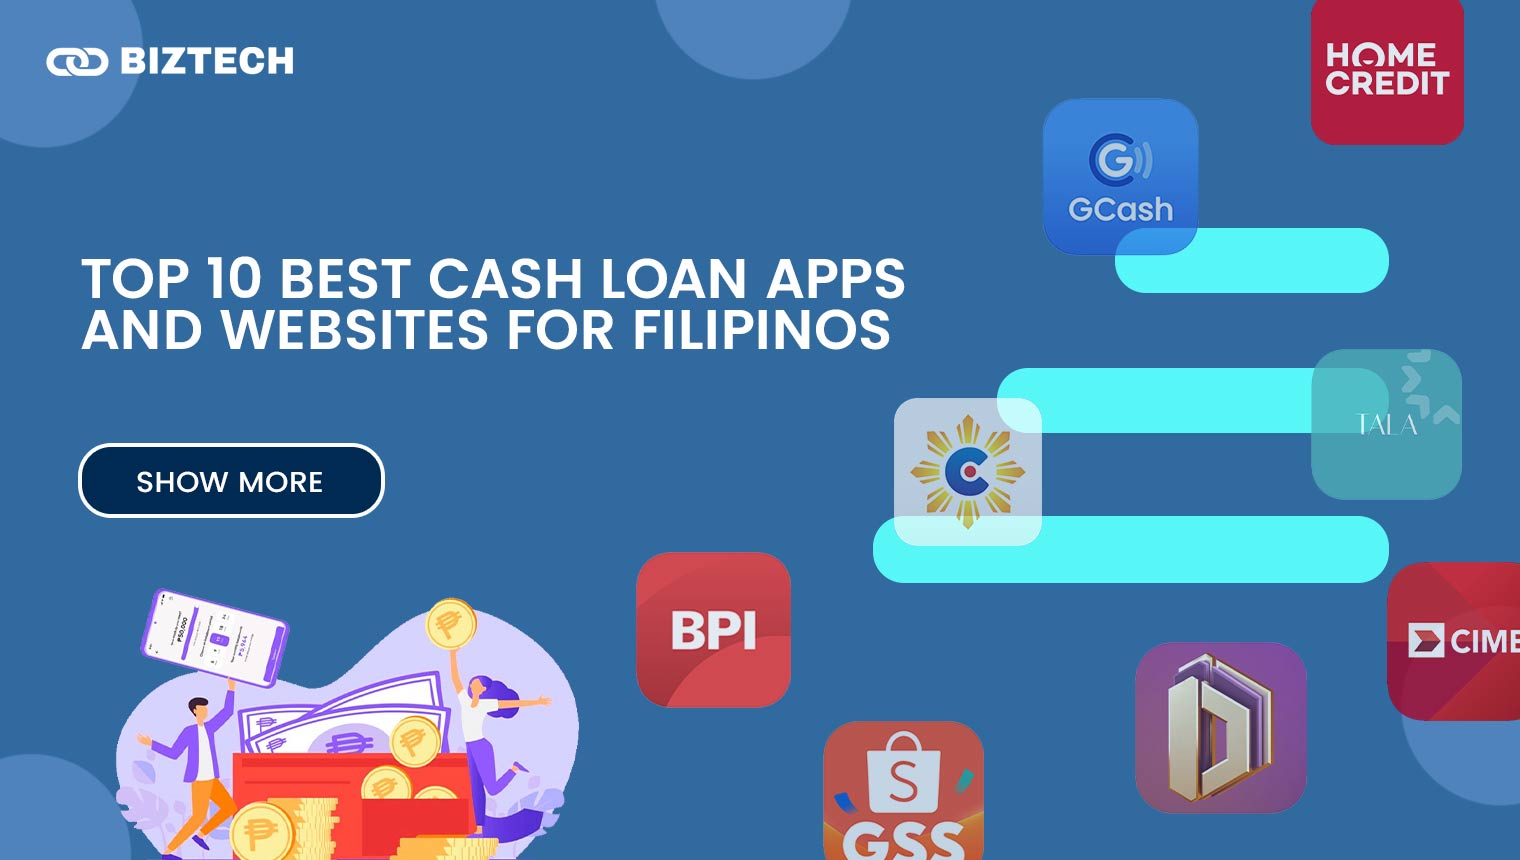 Top 10 Best Cash Loan Apps and Websites for Filipinos